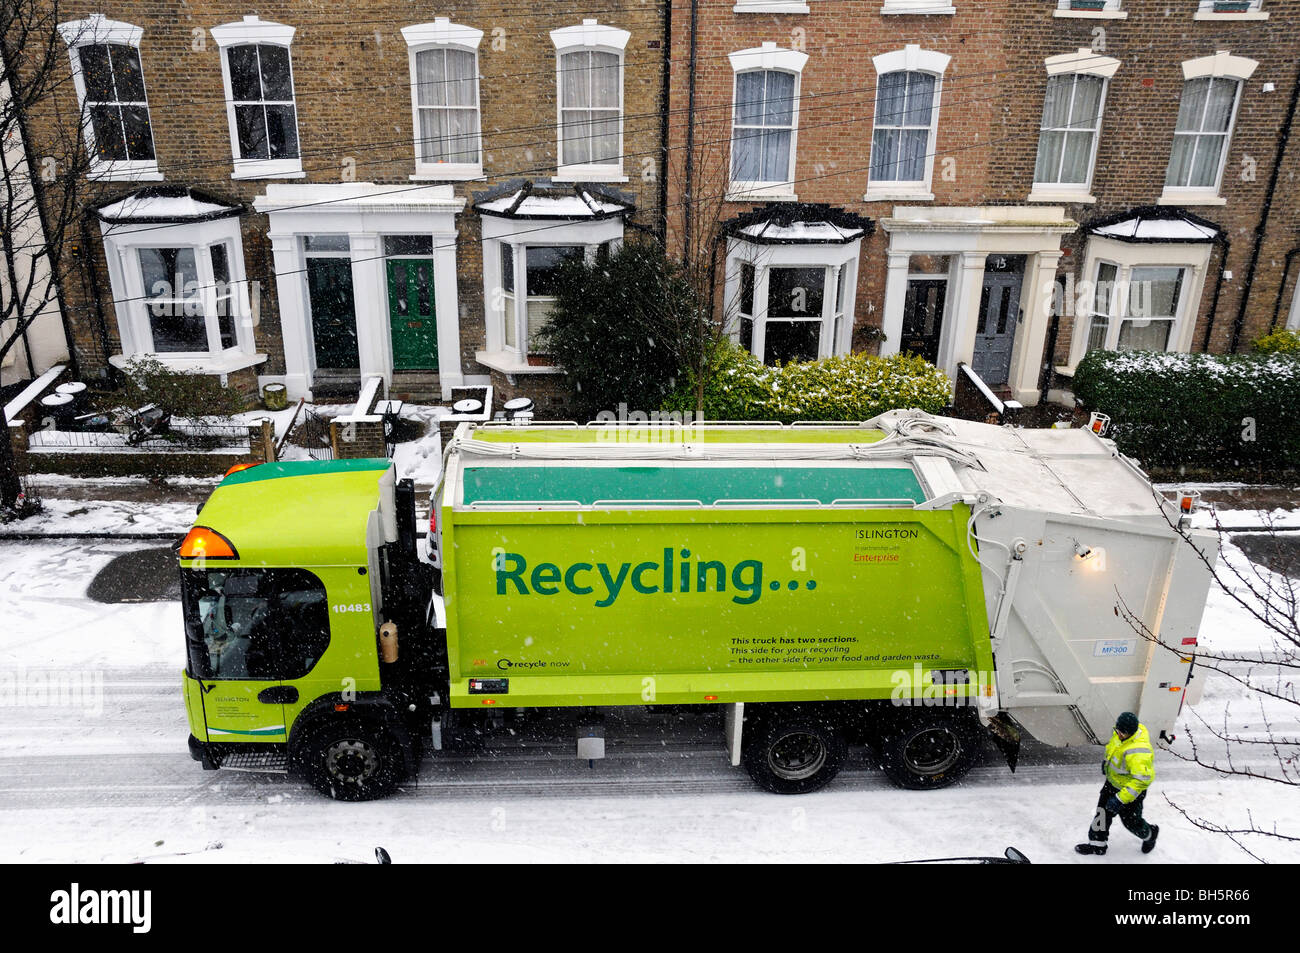 Recycling truck in snow with council worker, Holloway Islington London England UK Stock Photo